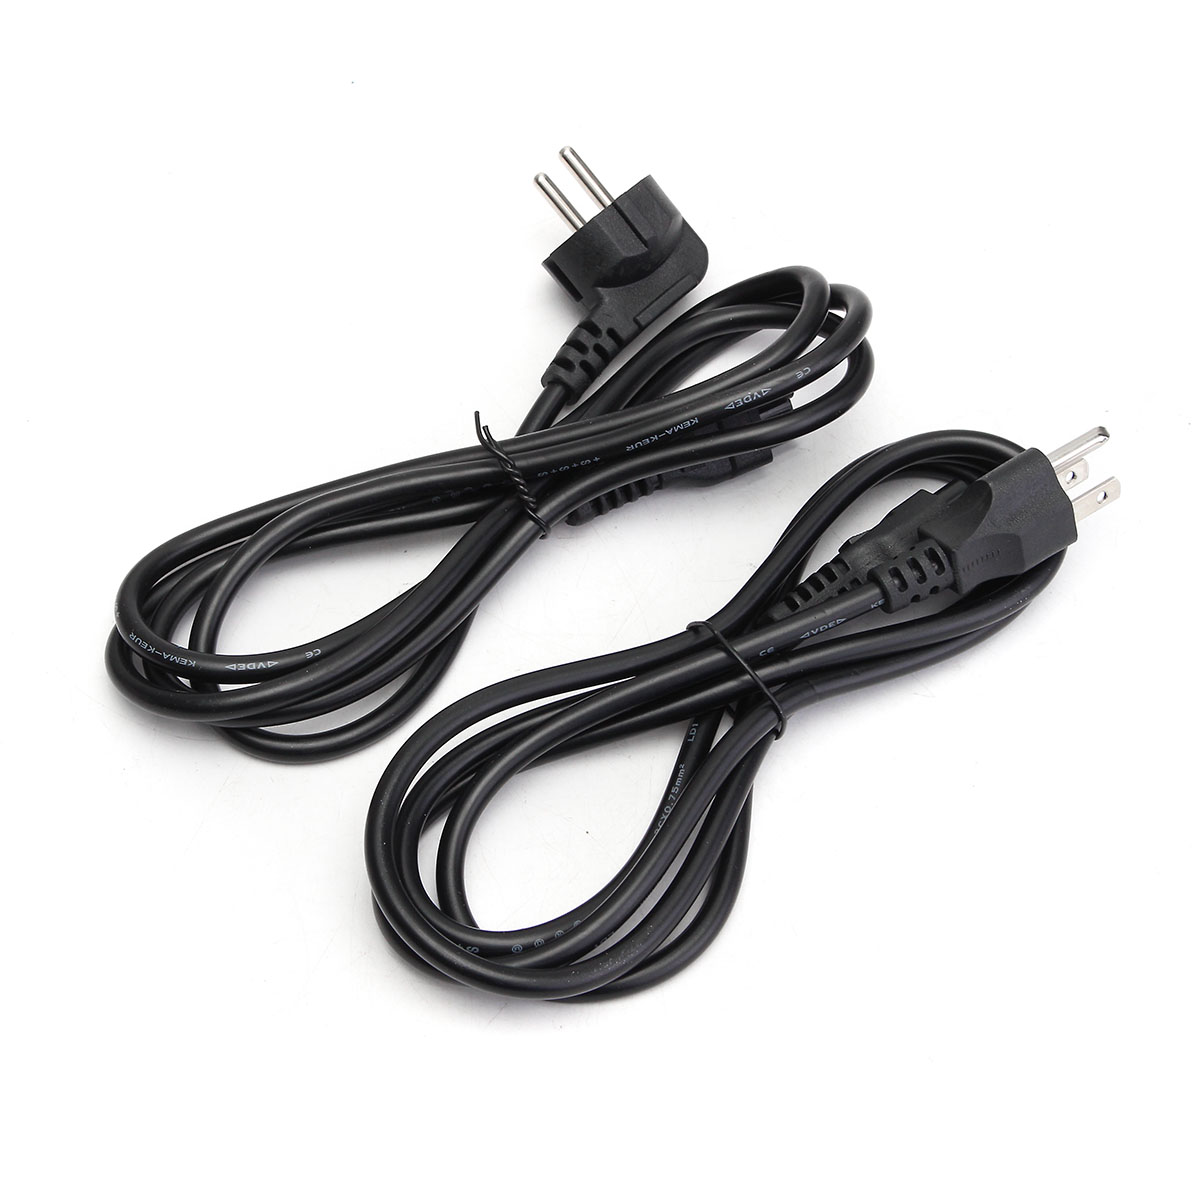 DC-19V-342A--Power-Adapter-Universal-Power-Supply-Charger-USEU-Plug-1363367-7